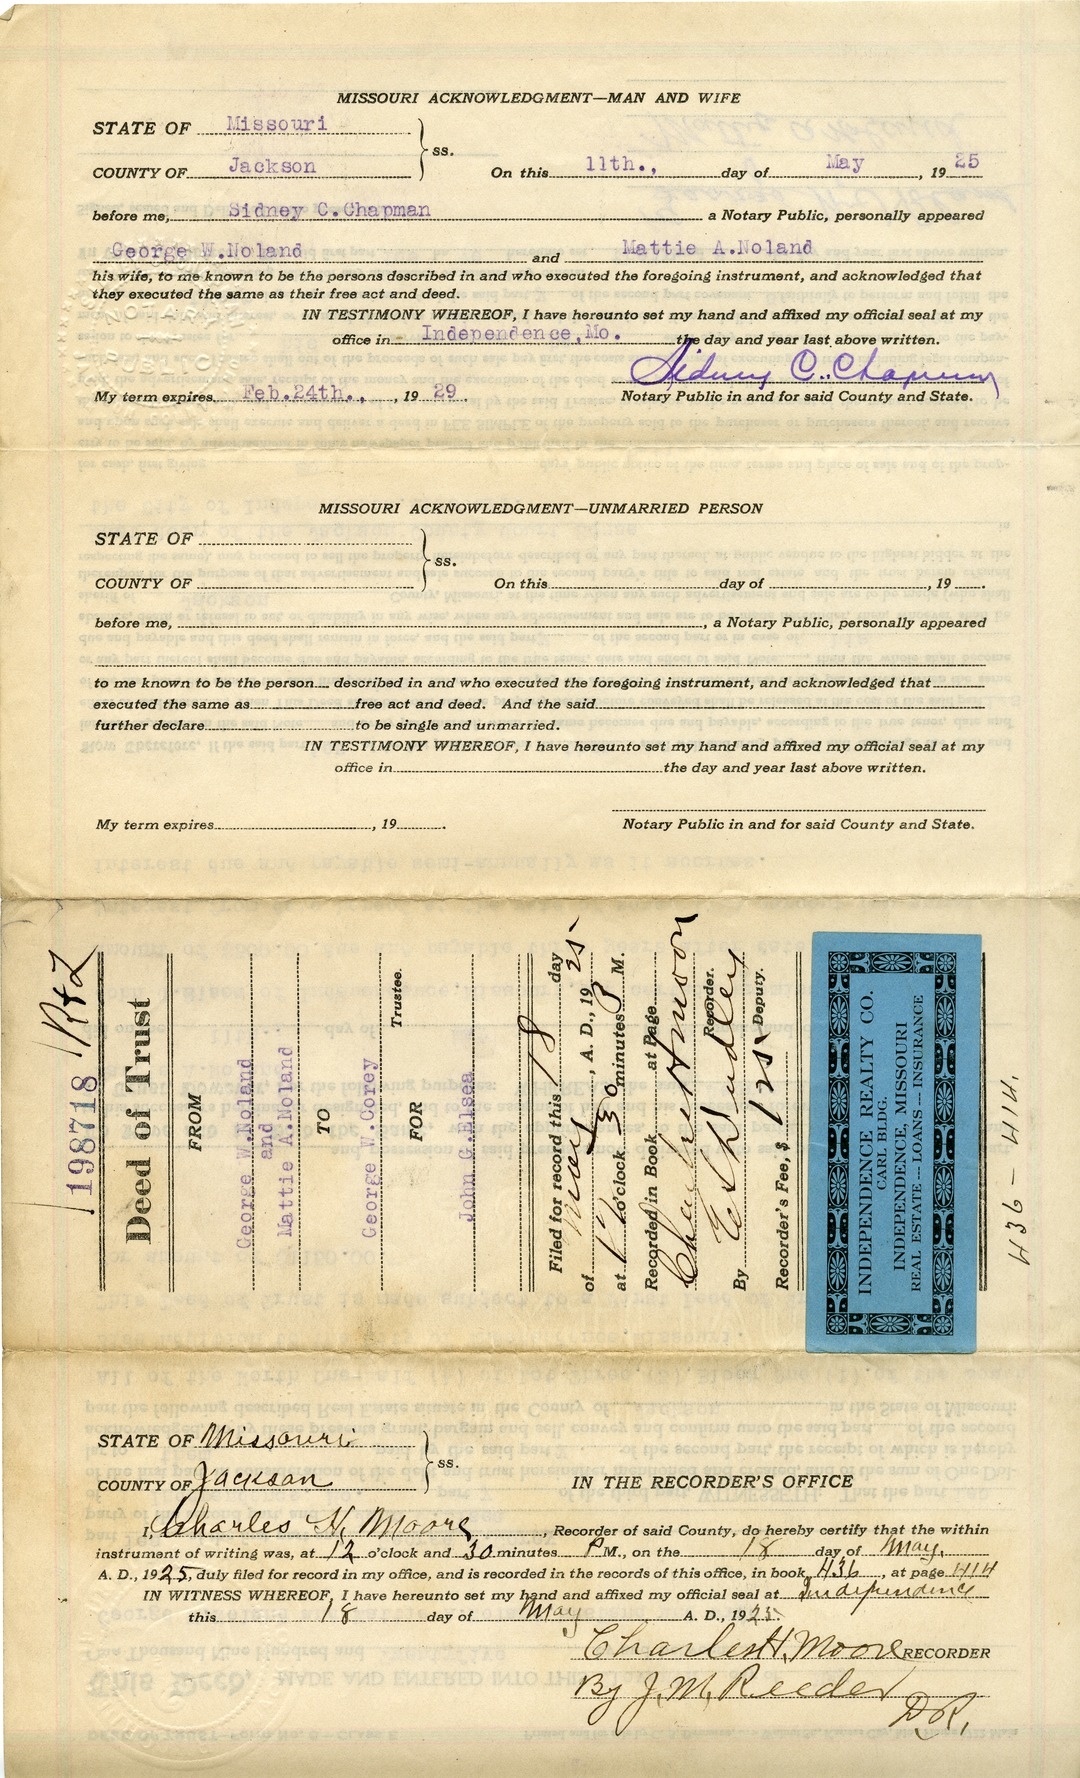 Deed of Trust from George W. Noland and Mattie A. Noland to George W. Corey for John C. Elsea